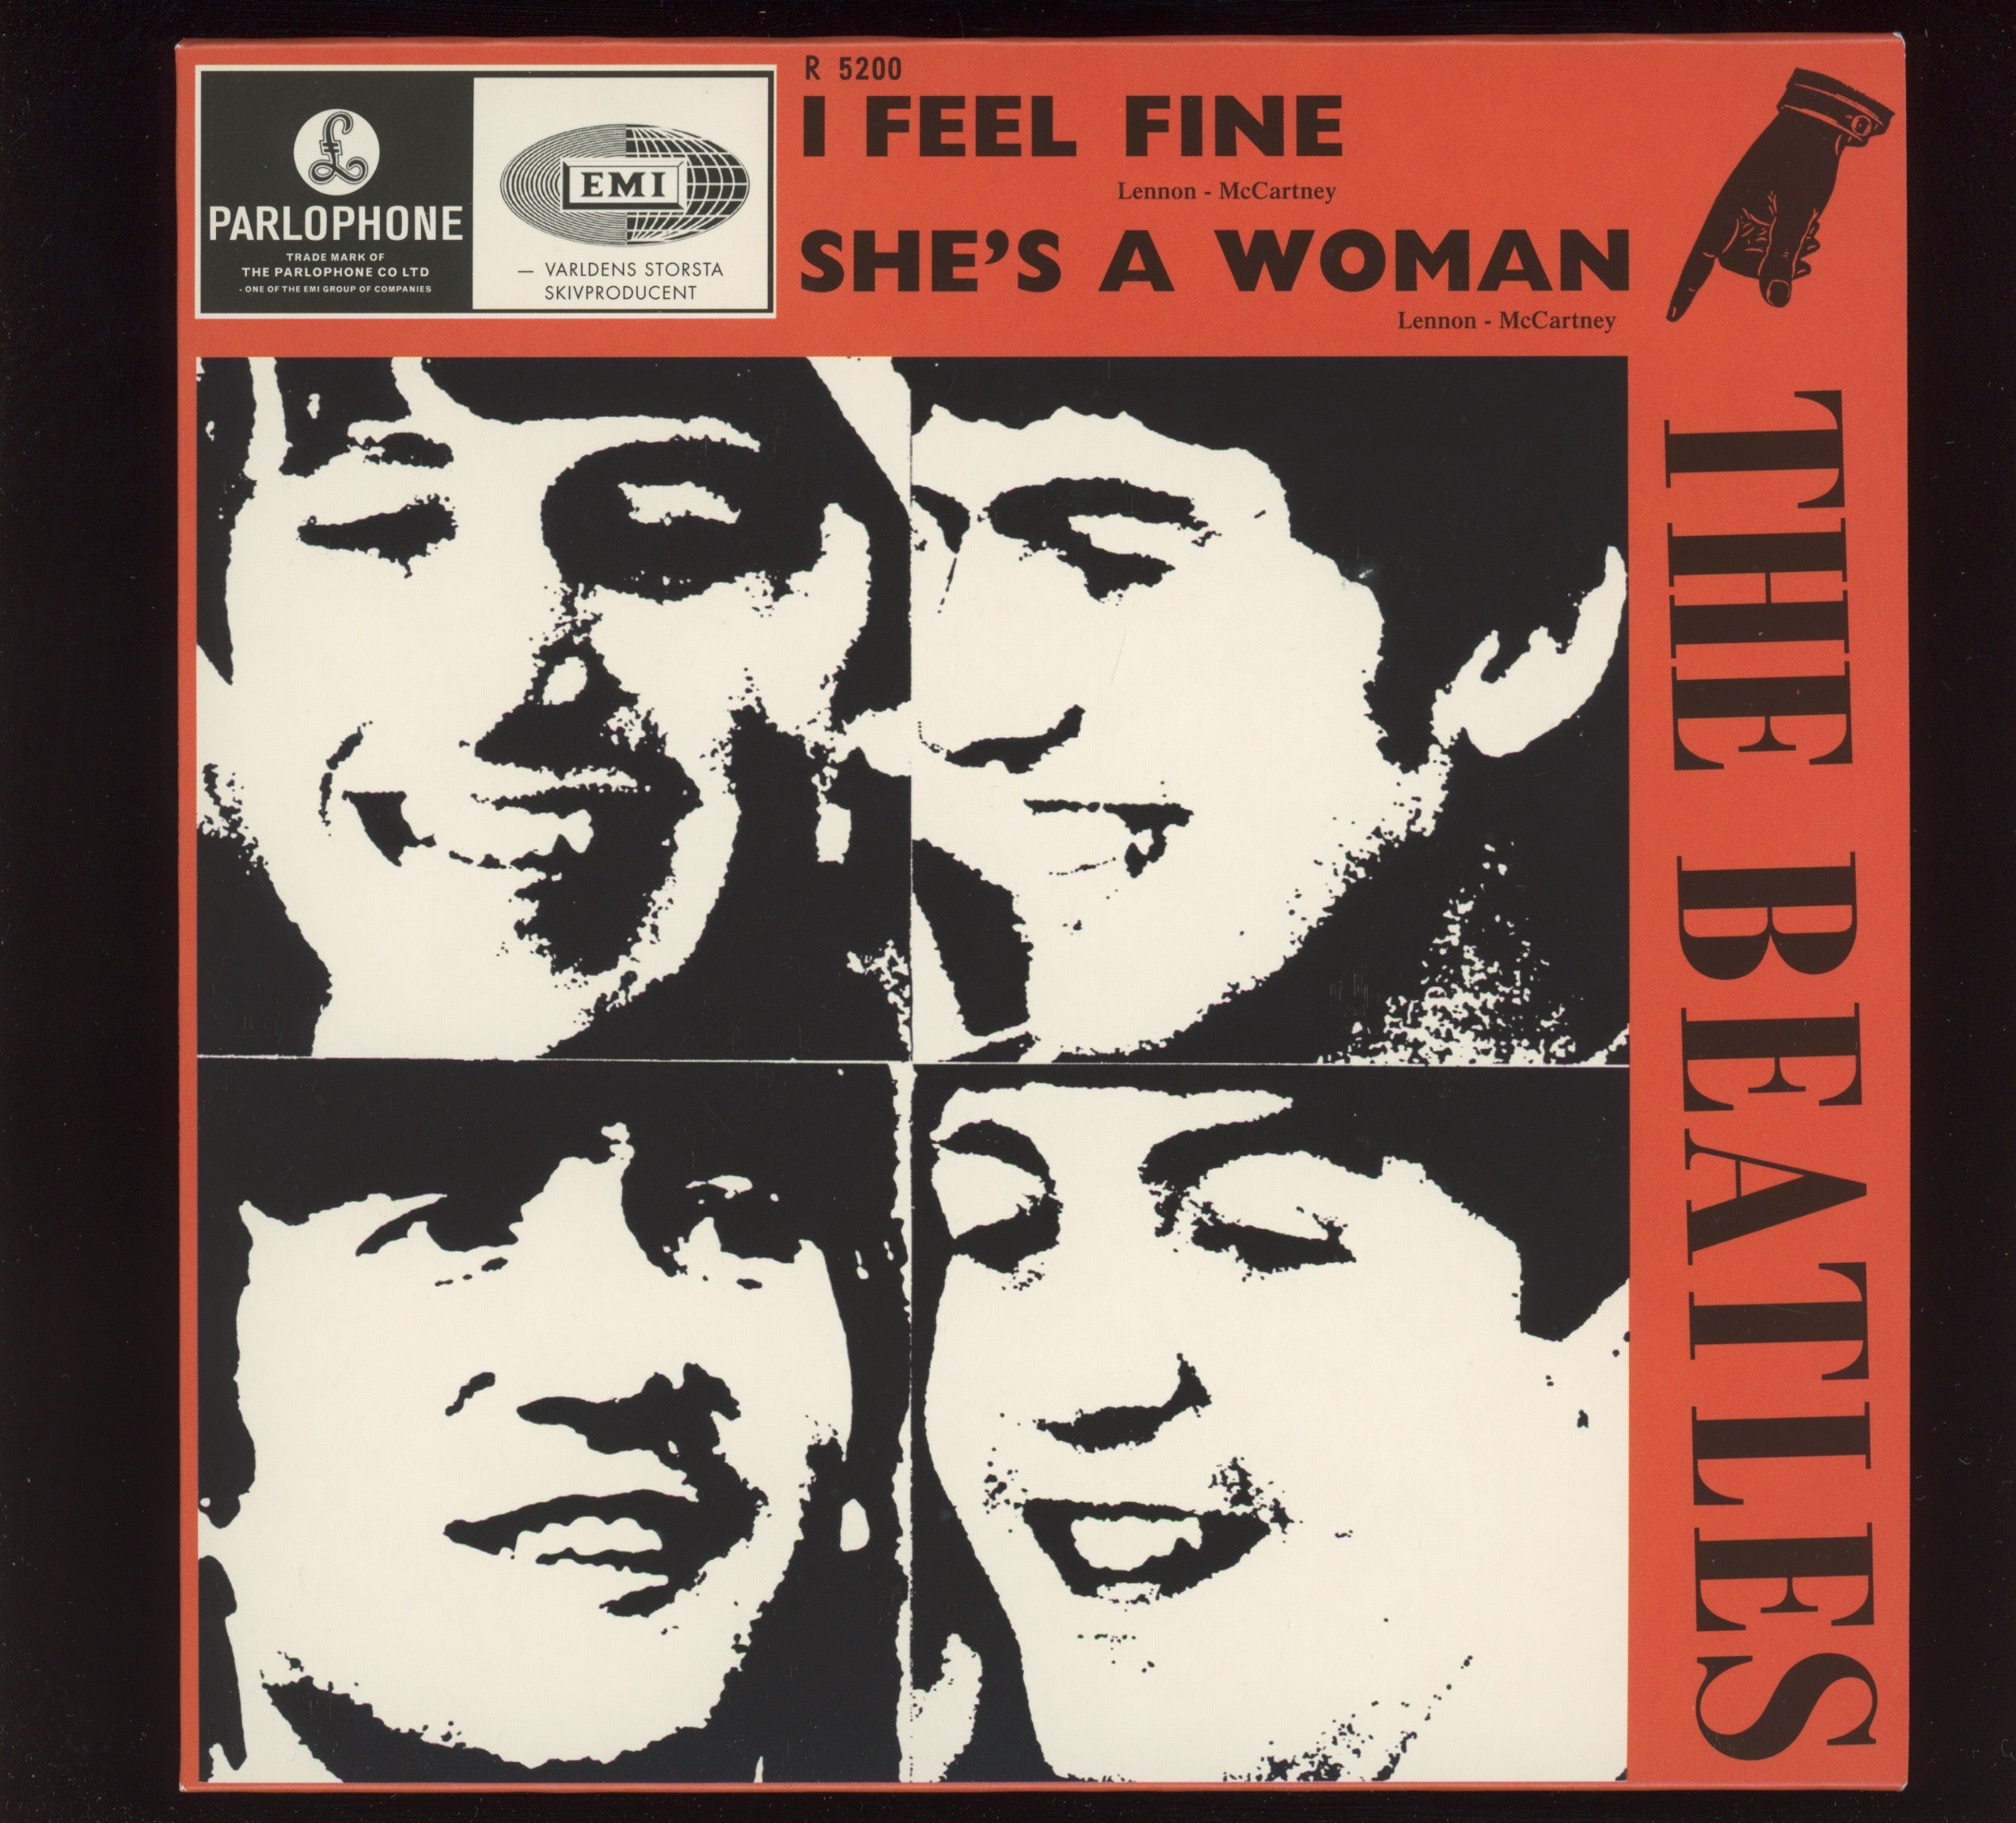 The Beatles - I Feel Fine / She's A Woman on Parlophone 7" Reissue With Picture Cover